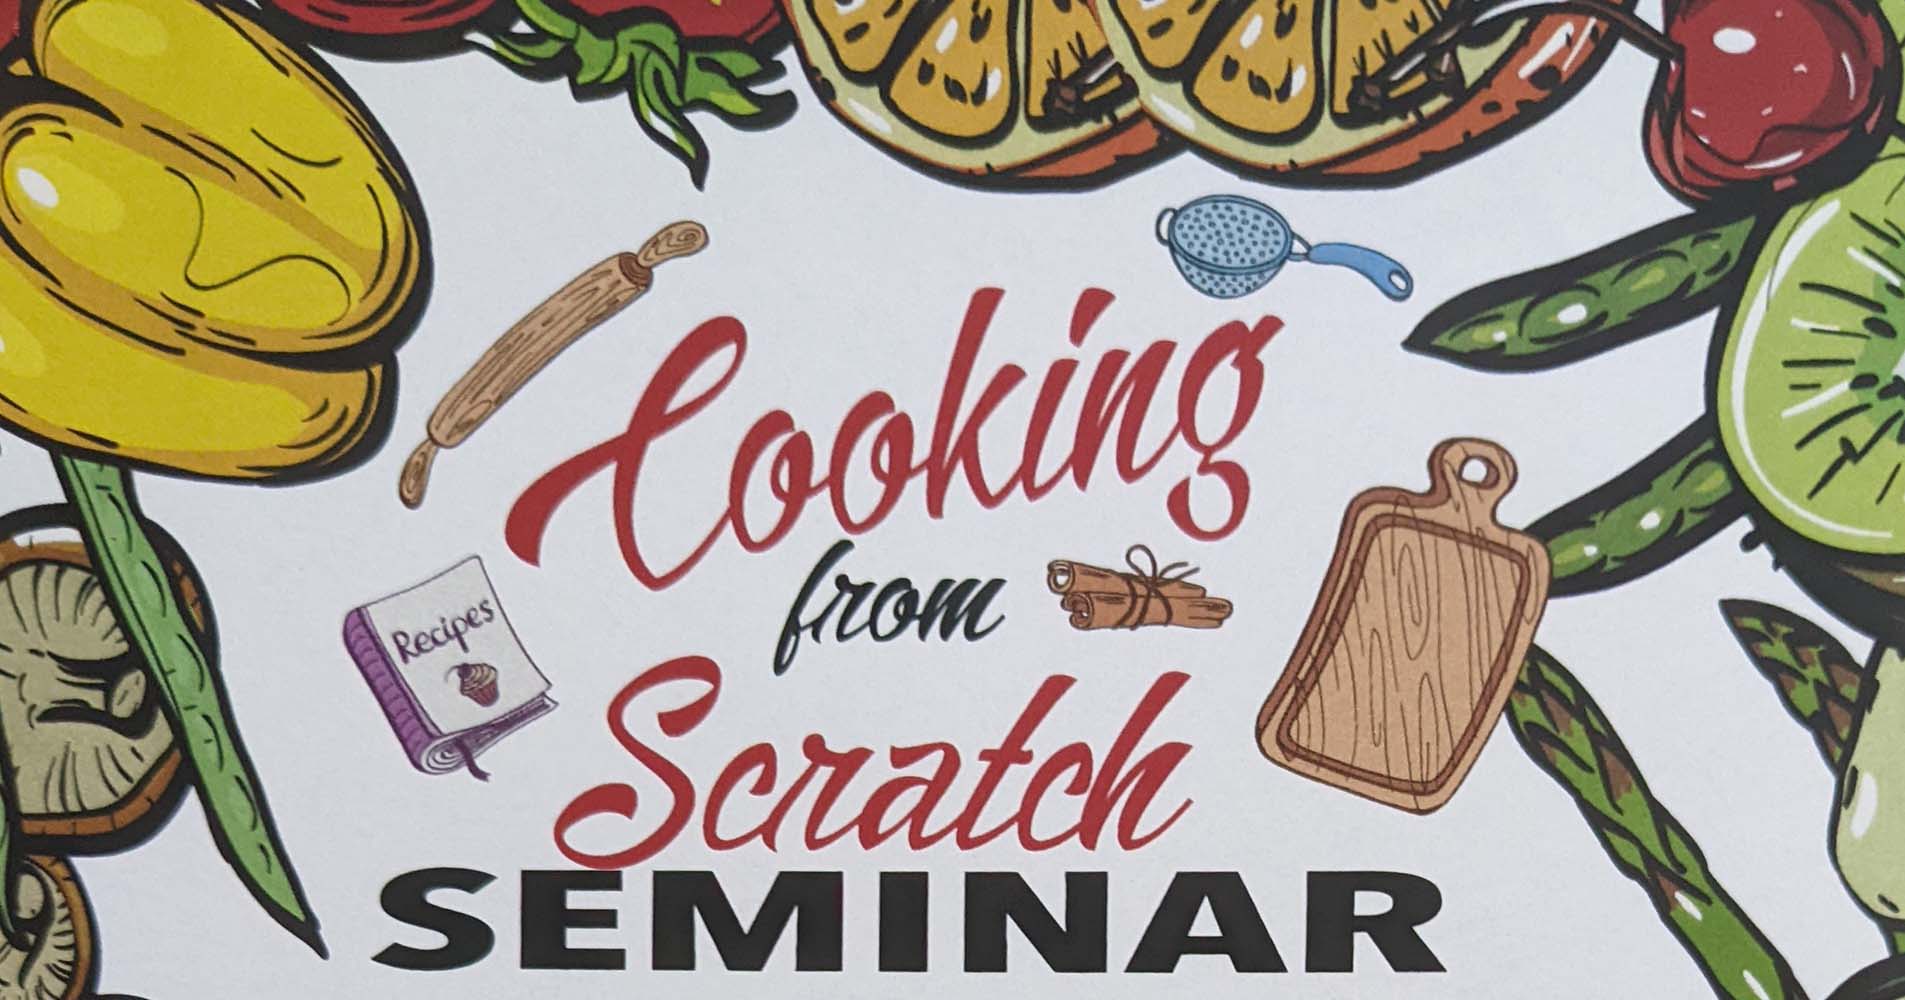 Cooking From Scratch – Healthy & Economical